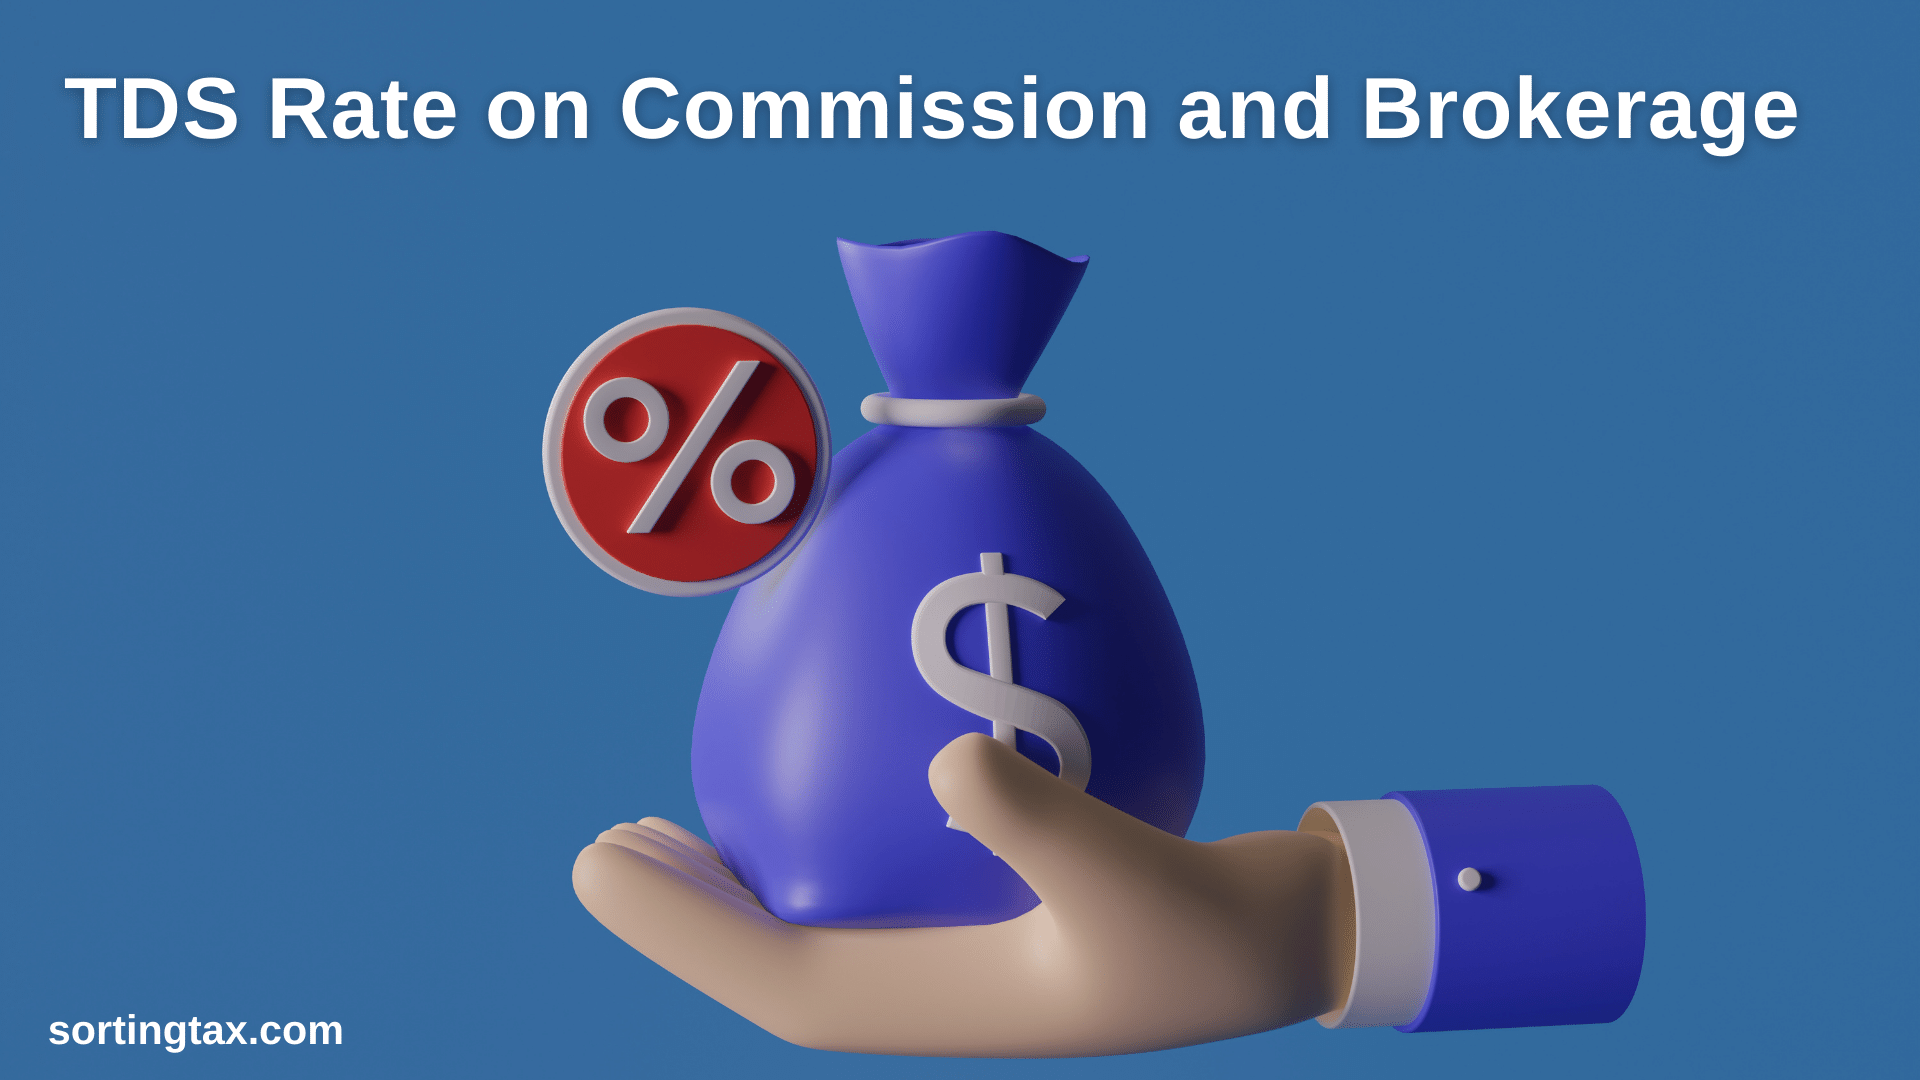 Section 194h of Income Tax Act - TDS Rate on Commission and Brokerage